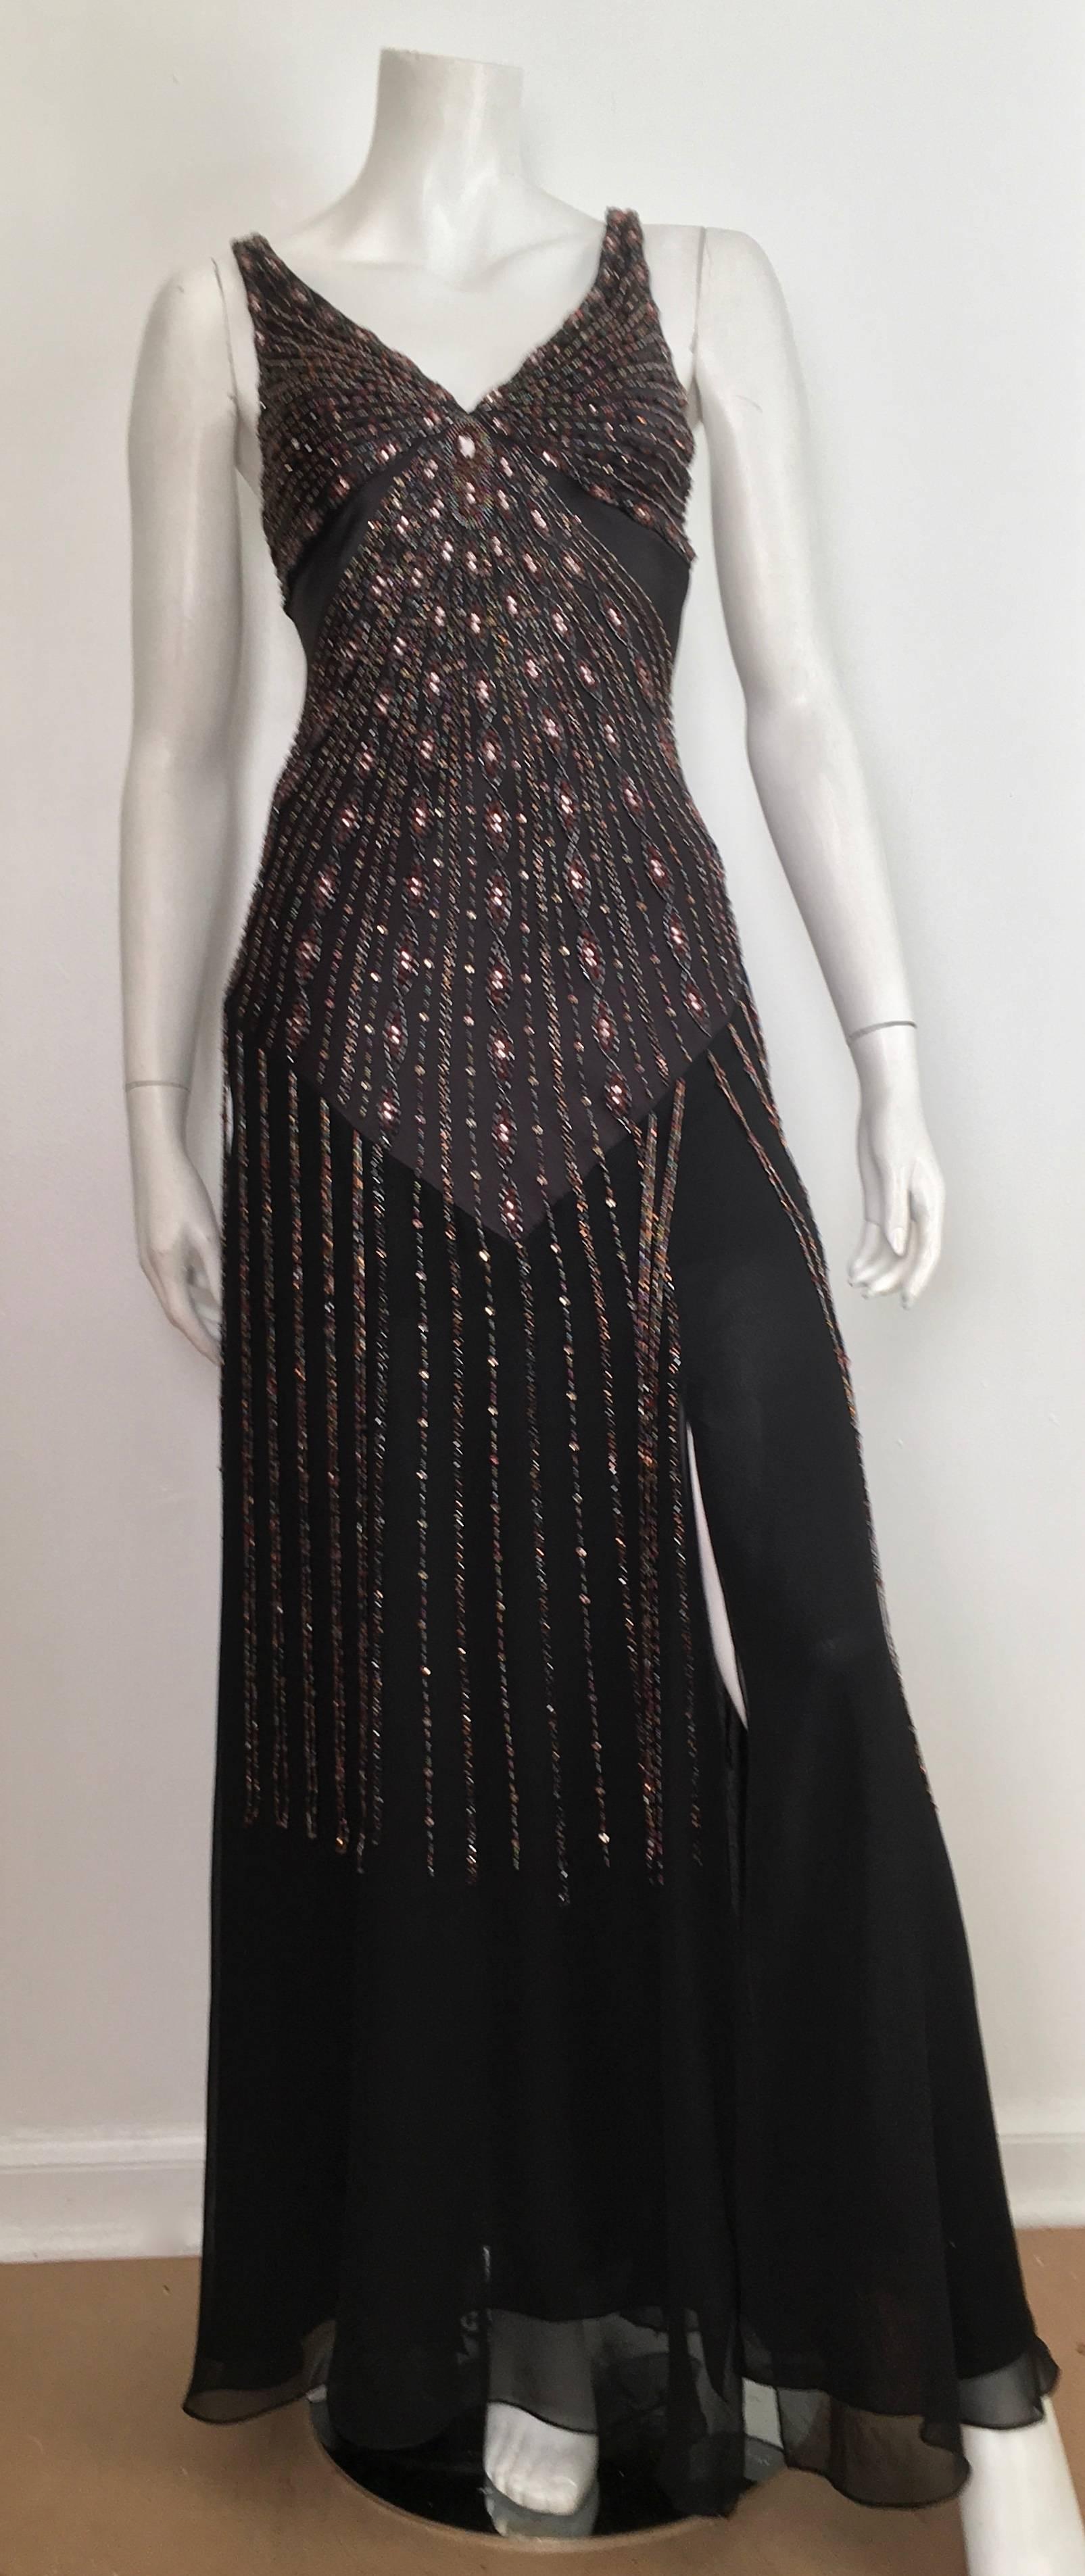 sue wong nocturne beaded dress